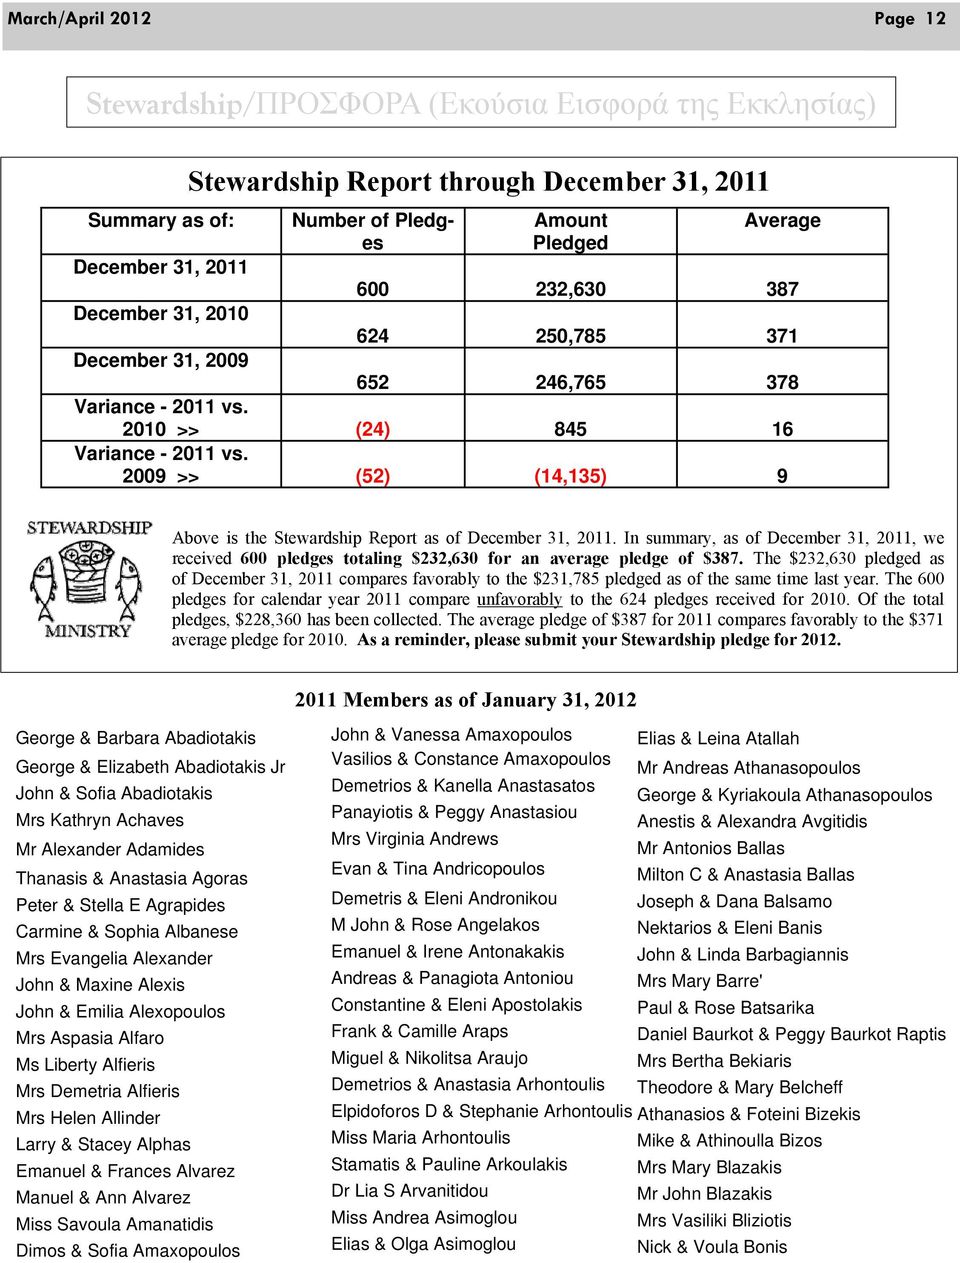 2009 >> (52) (14,135) 9 Above is the Stewardship Report as of December 31, 2011. In summary, as of December 31, 2011, we received 600 pledges totaling $232,630 for an average pledge of $387.